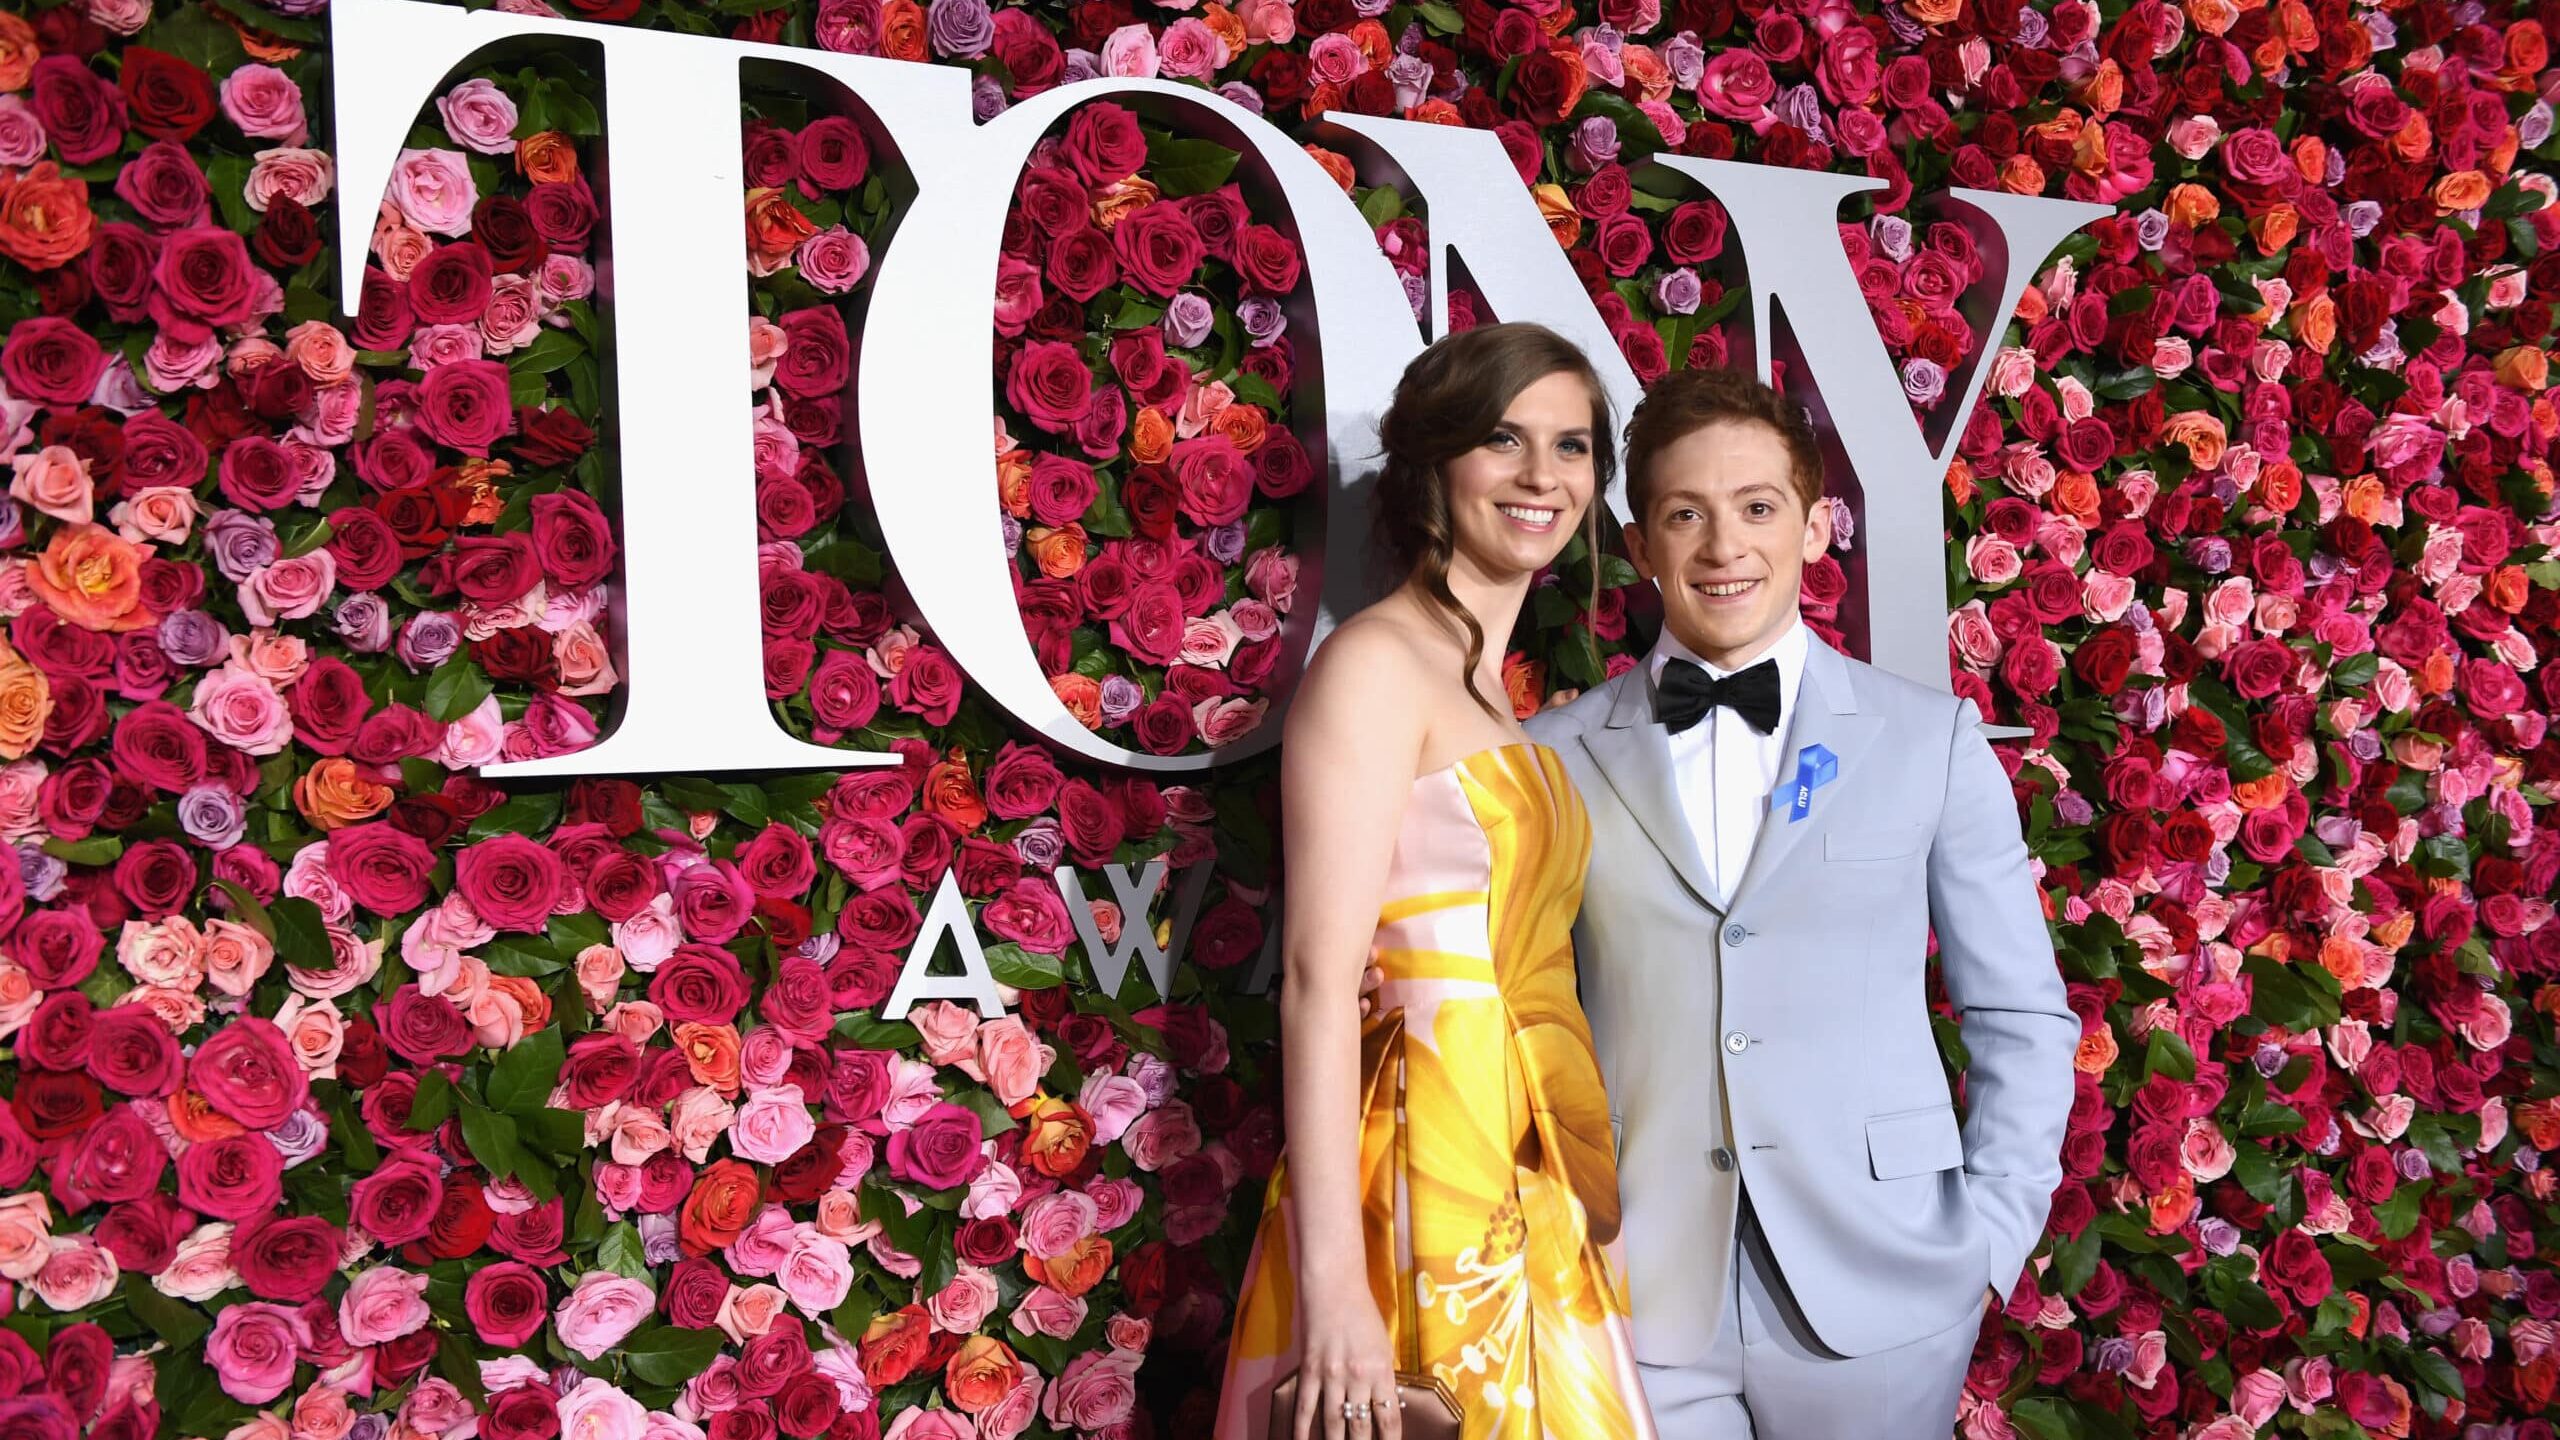 NEW YORK, NY - JUNE 10: Ethan Slater (R) attends the 72nd Annual Tony Awards at Radio City Music Hall on June 10, 2018 in New York City. (